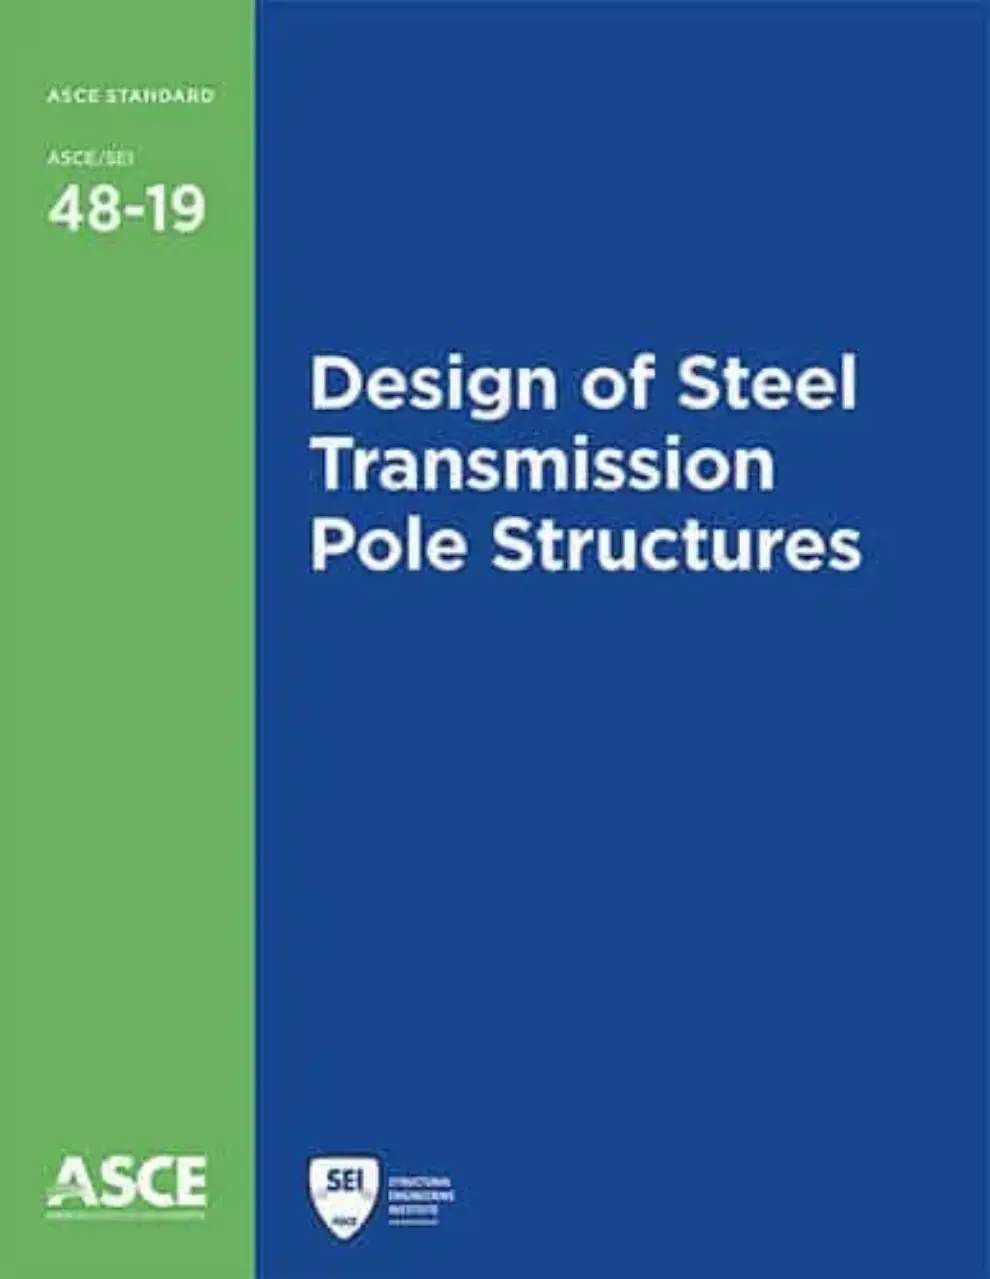 New Guidance on Electrical Transmission Poles Offered in Updated ASCE Standard 48